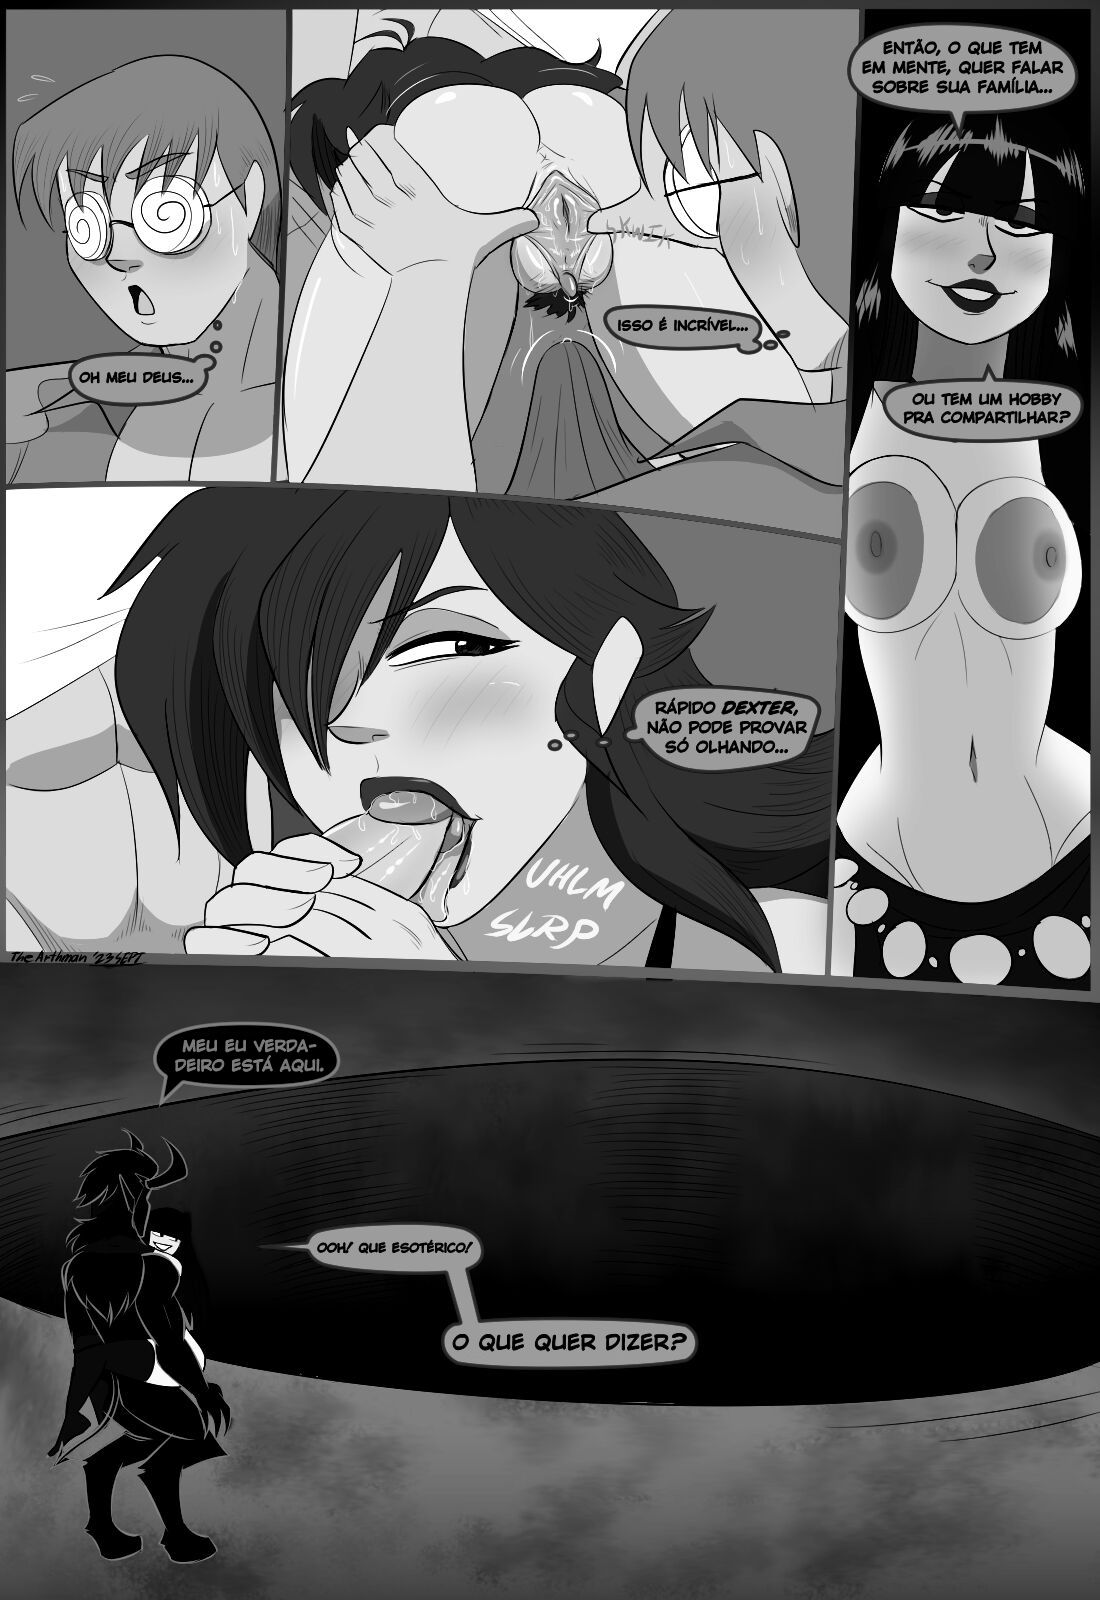 Dirtwater - Chapter 7 - Path of Sin Hentai pt-br 24